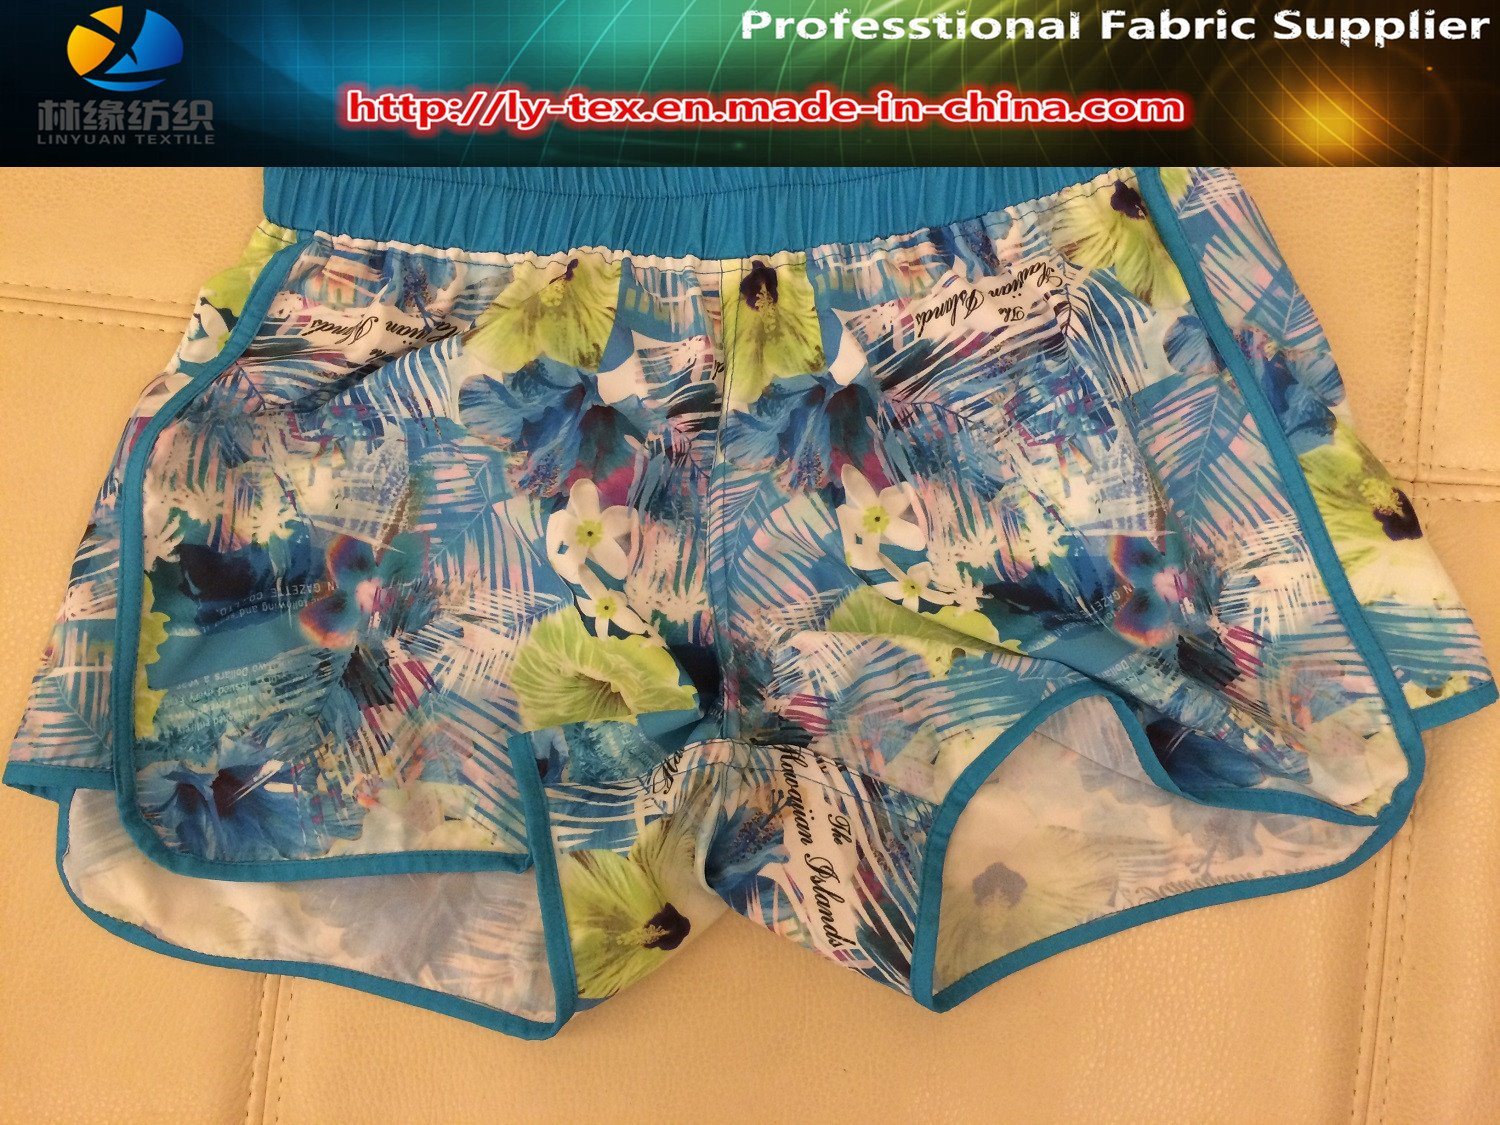 75D 4 Way Stretch Printing Fabric, 100%Polyester Spandex Fabric